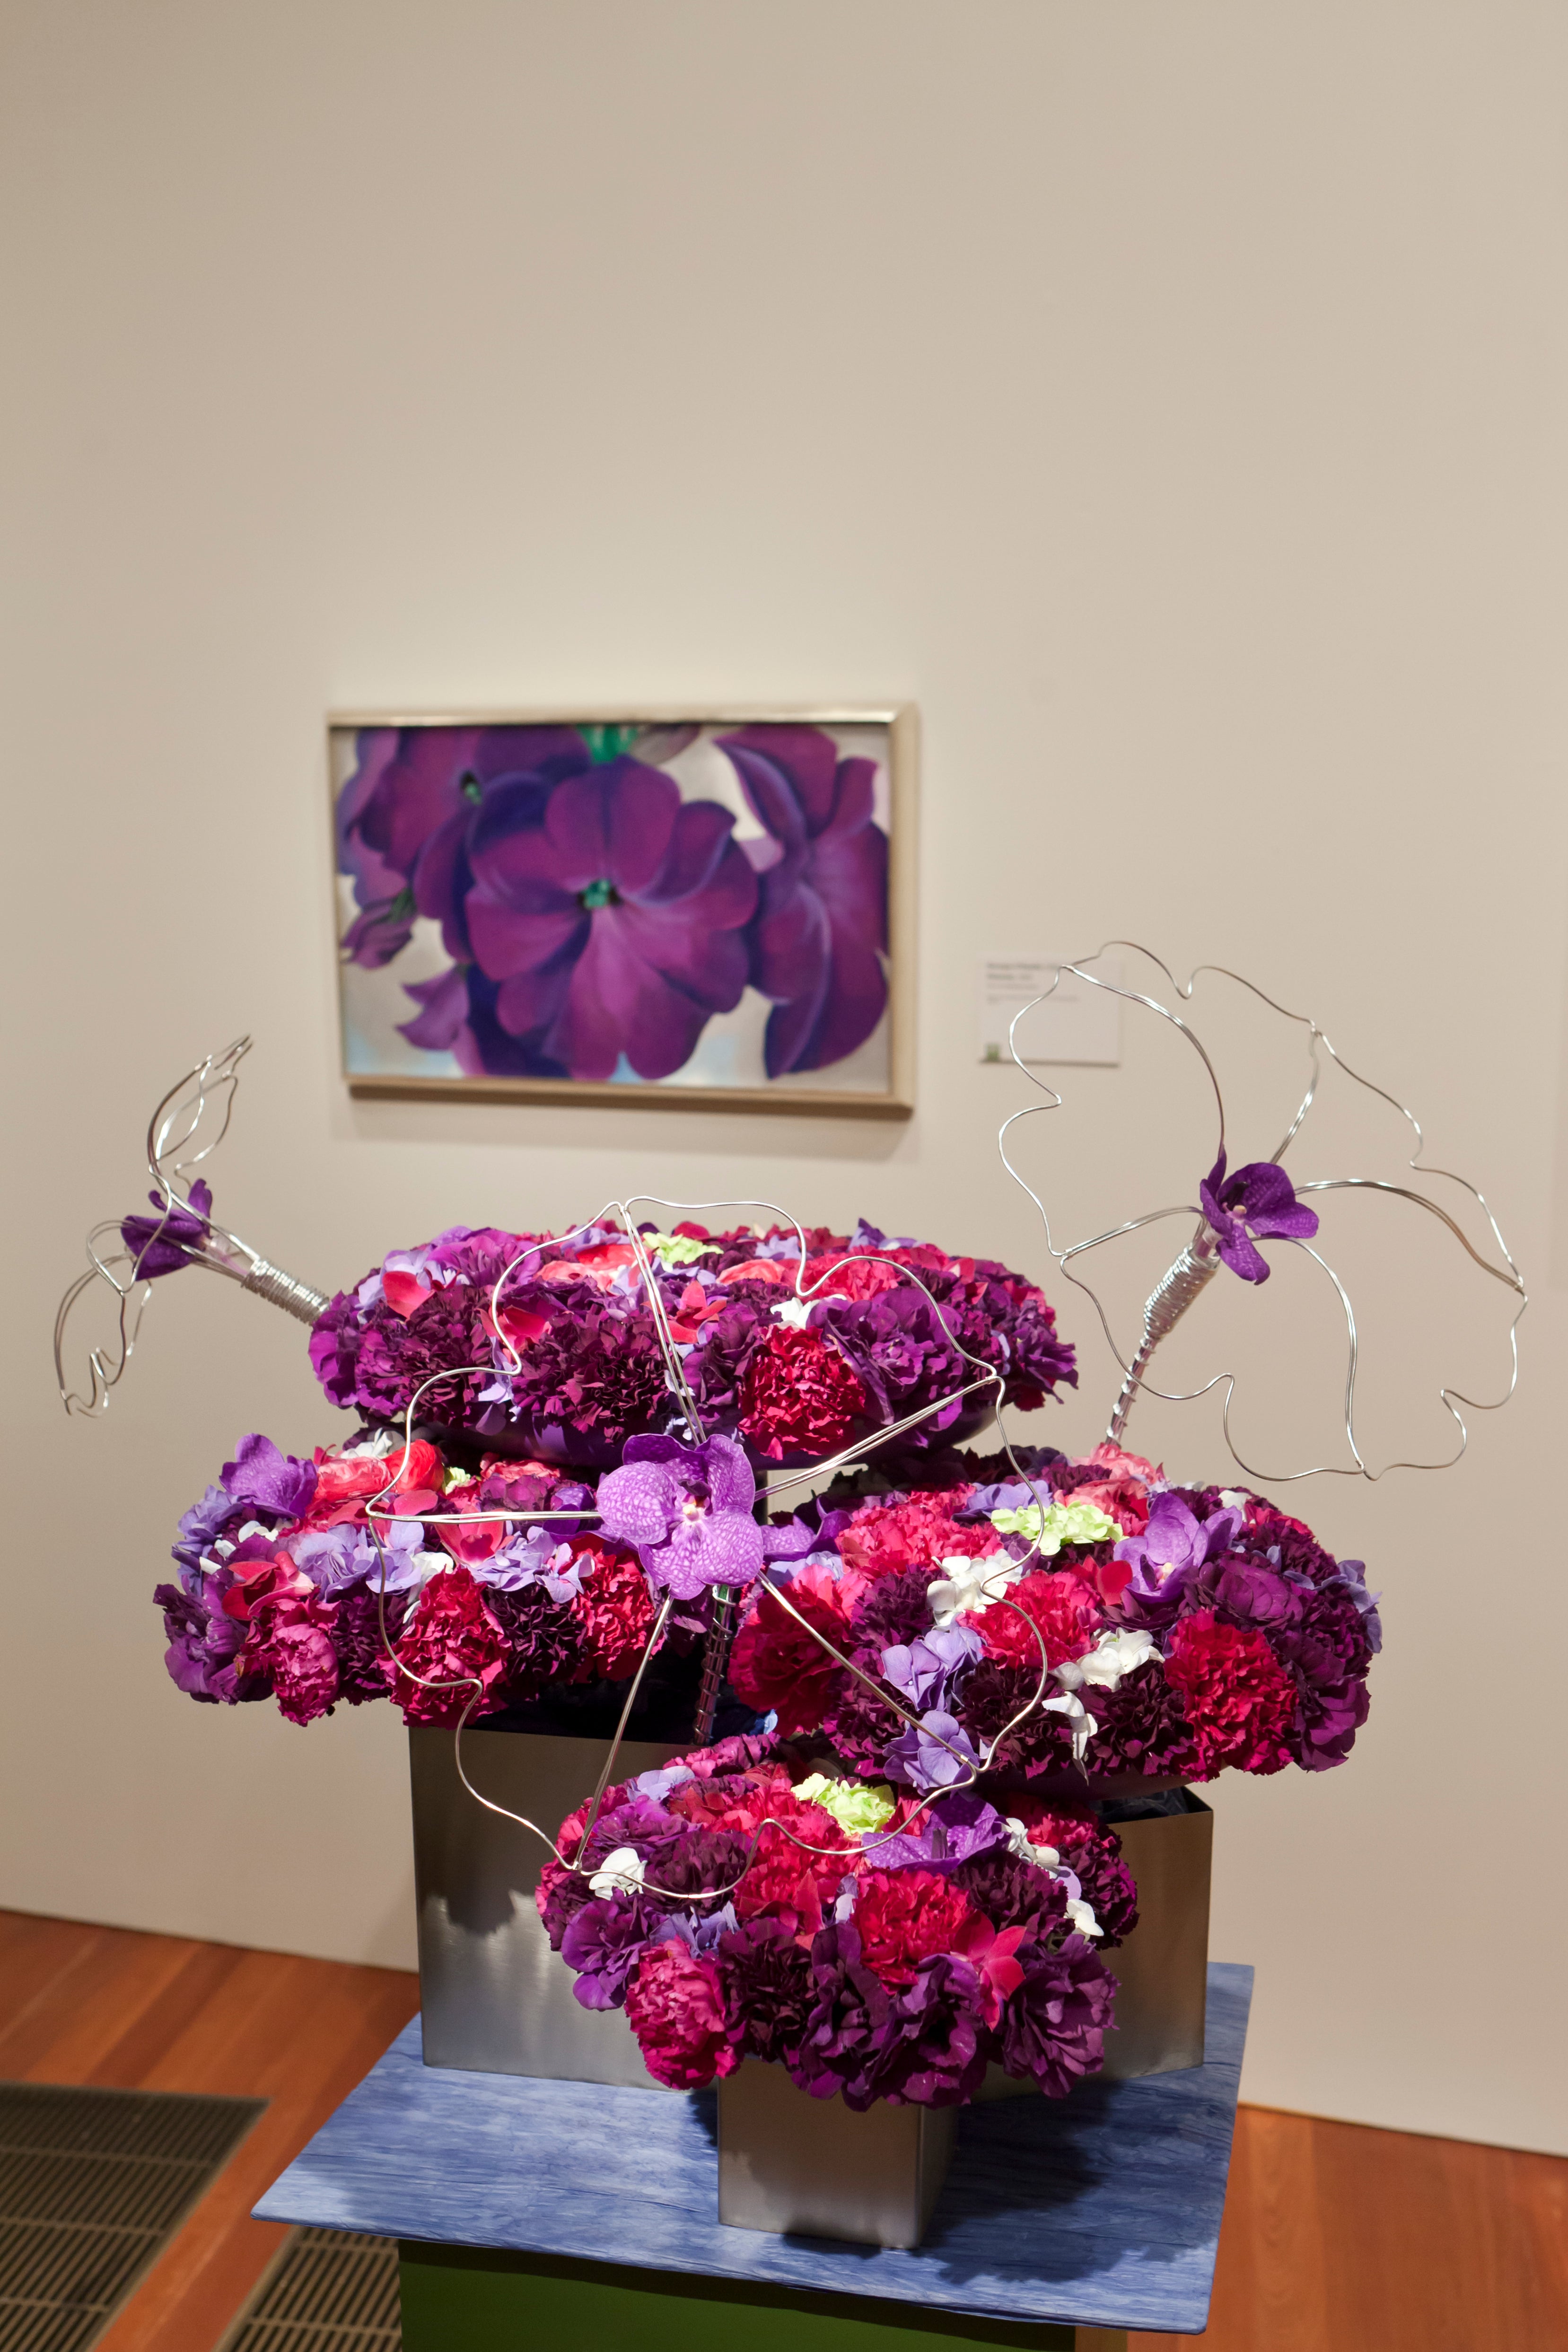 Bouquets to Art 2014: Celebrating 30 Years of Art through Flowers